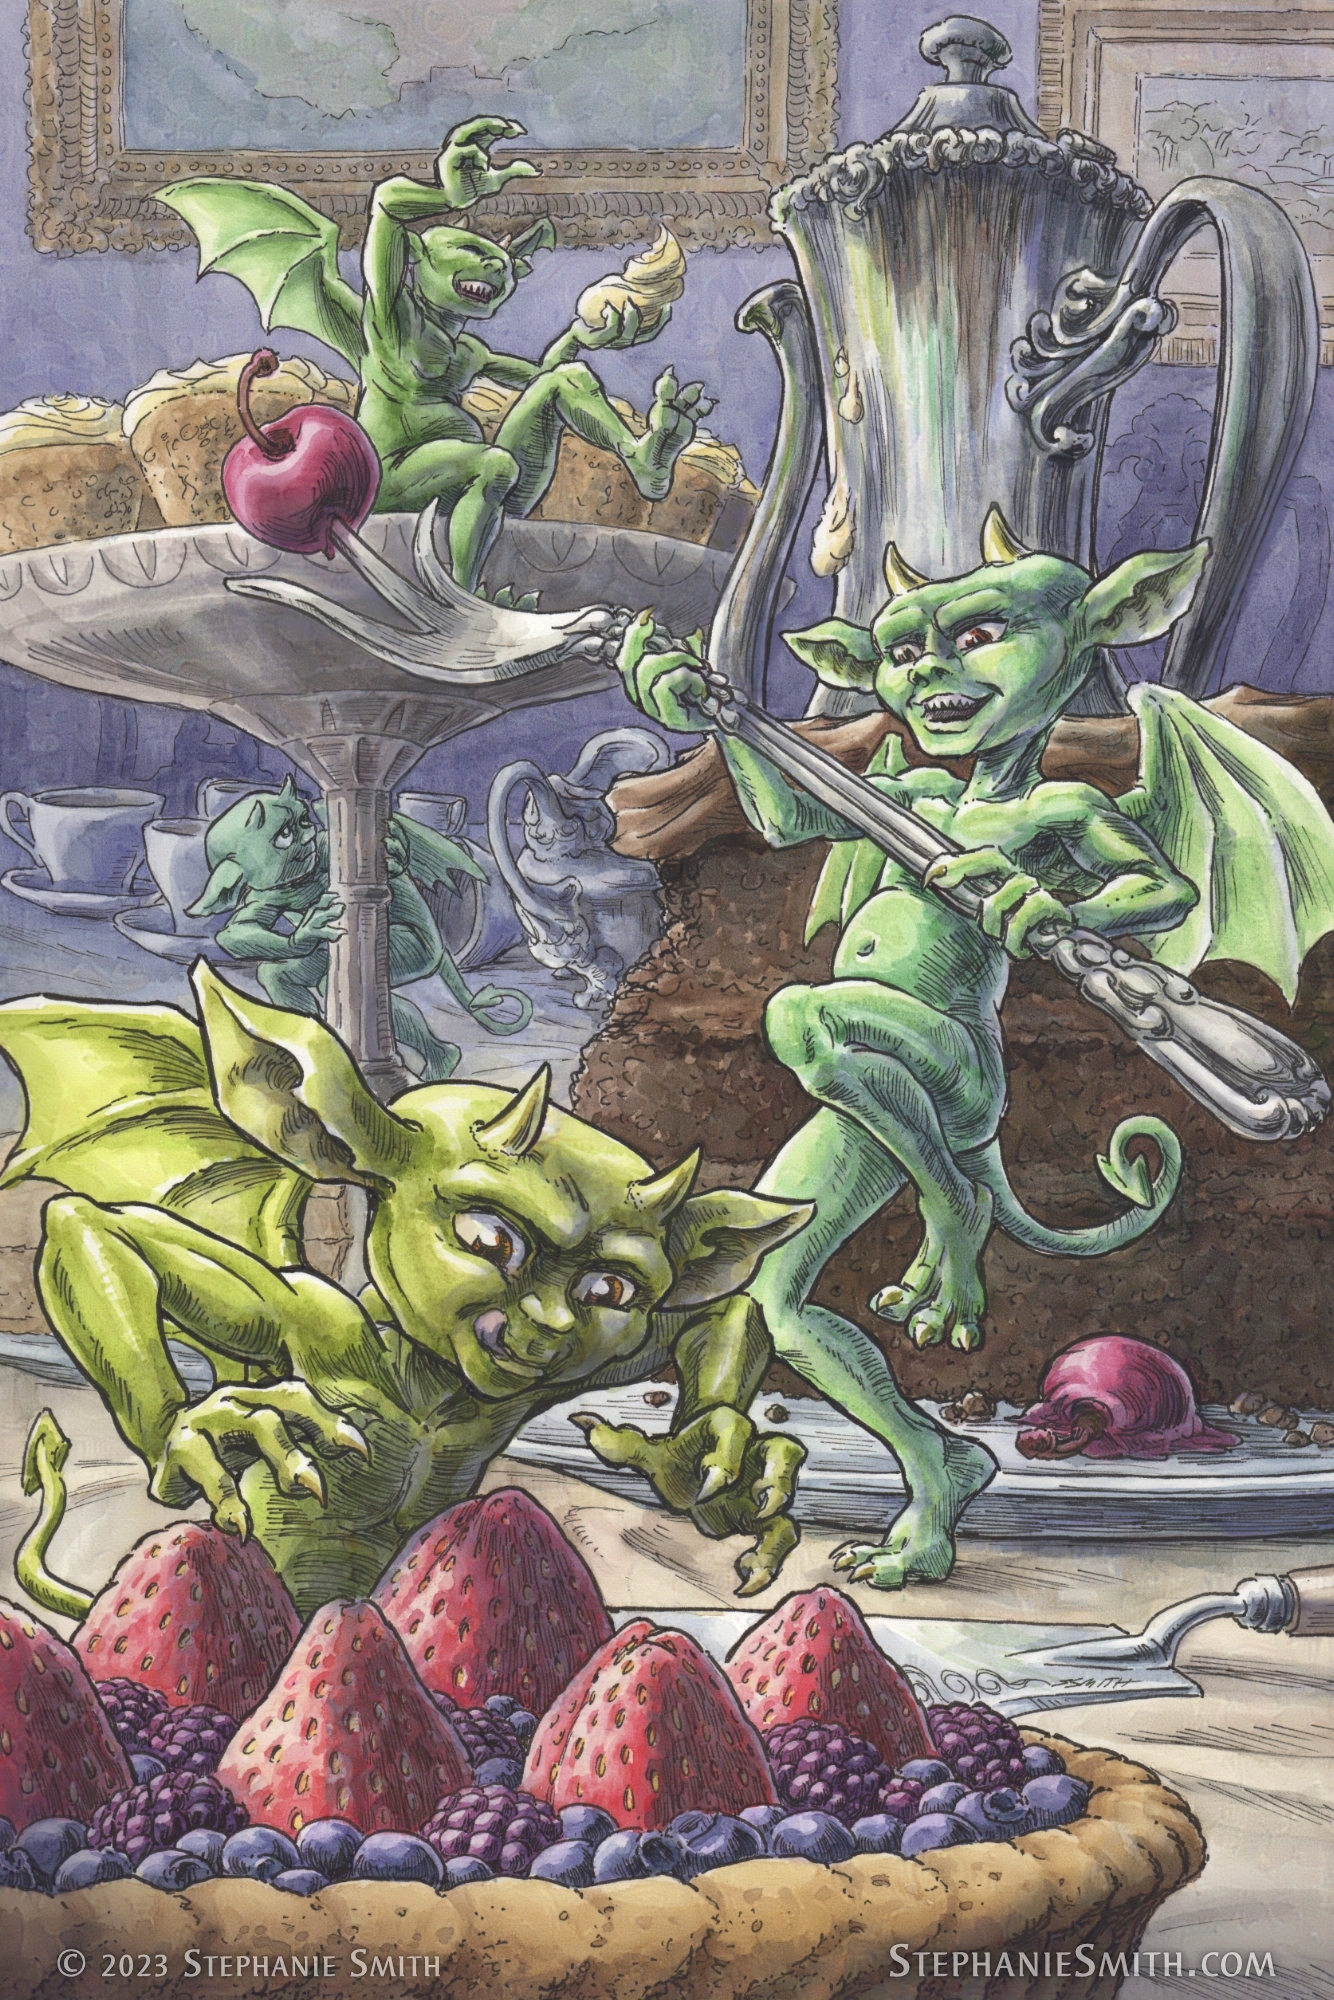 Painting of small green humanoid imps with tiny horns and wings, playing across a table set with fancy tableware and rich desserts, as if having a food fight.